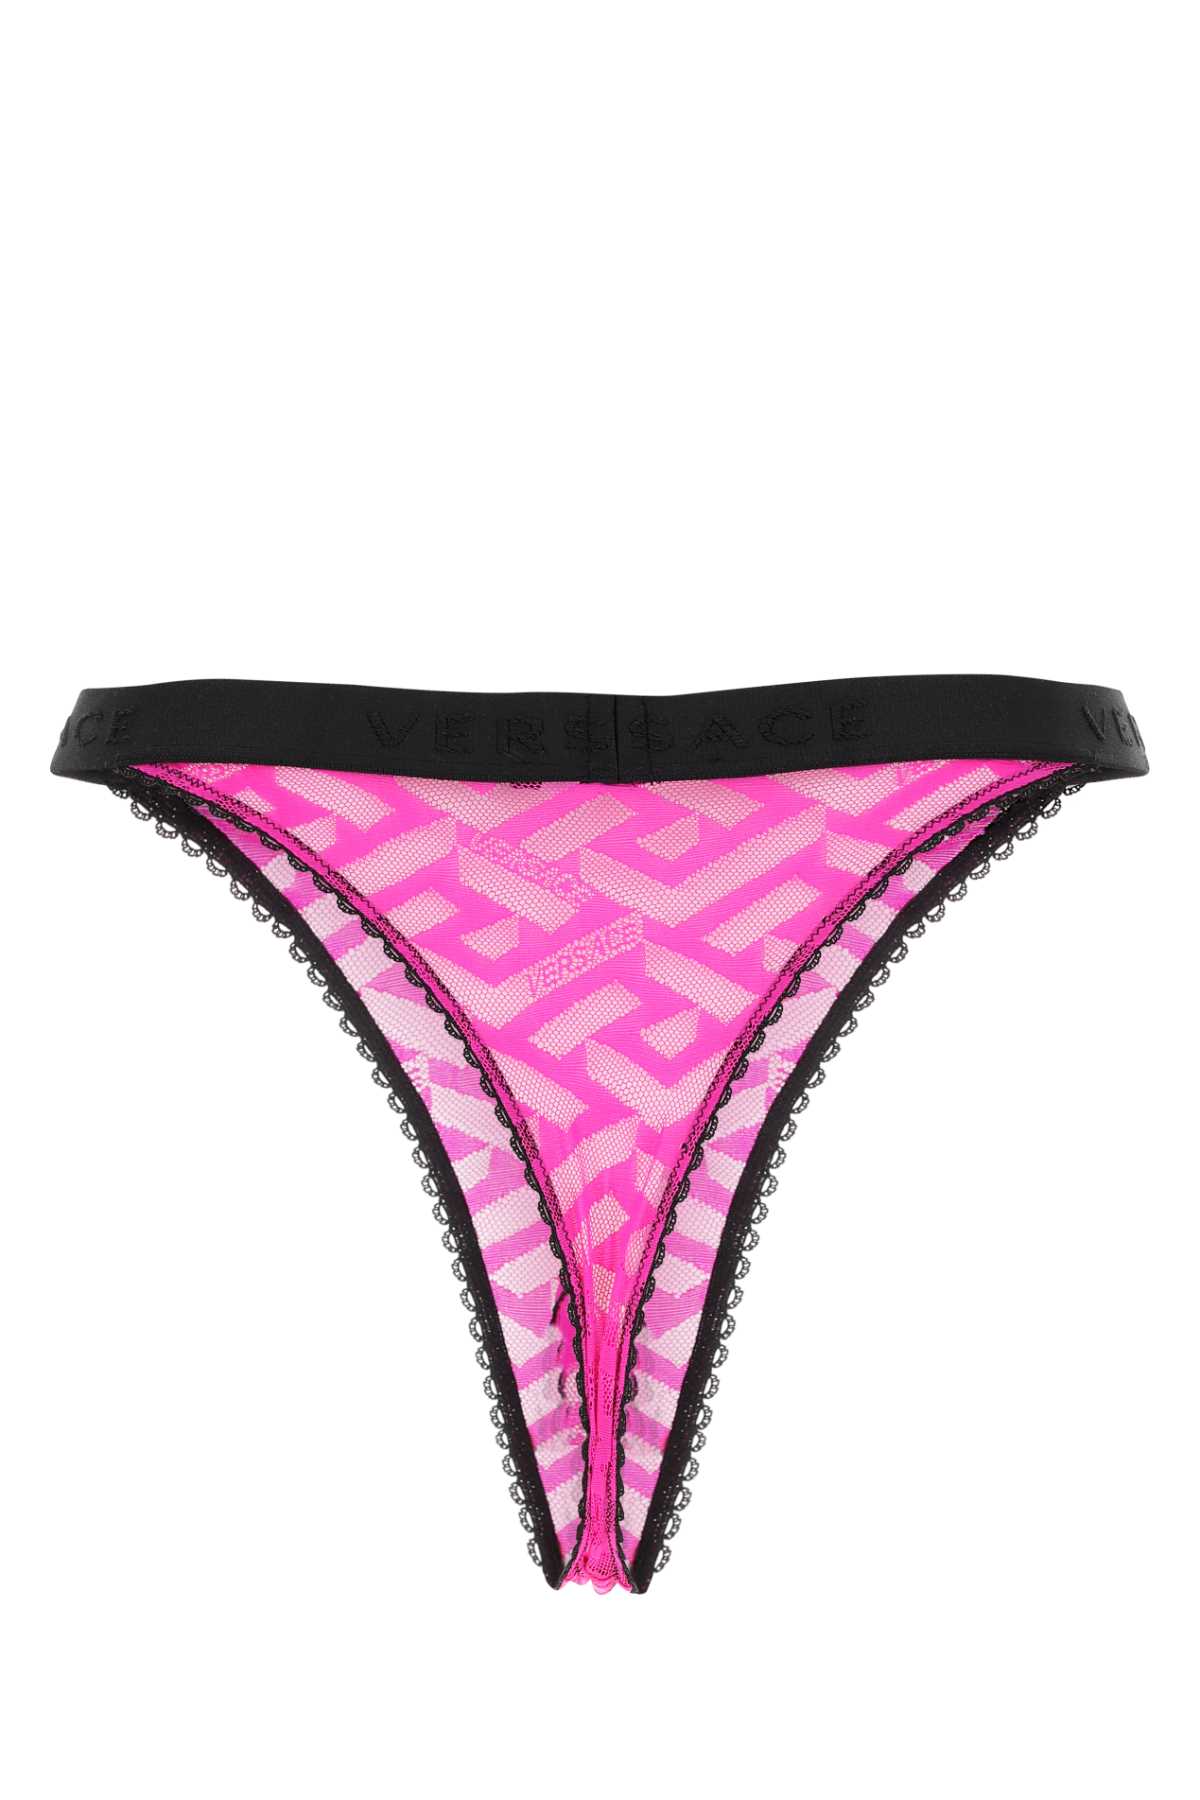 Versace Fuchsia Stretch Lace Thong In Glossypink